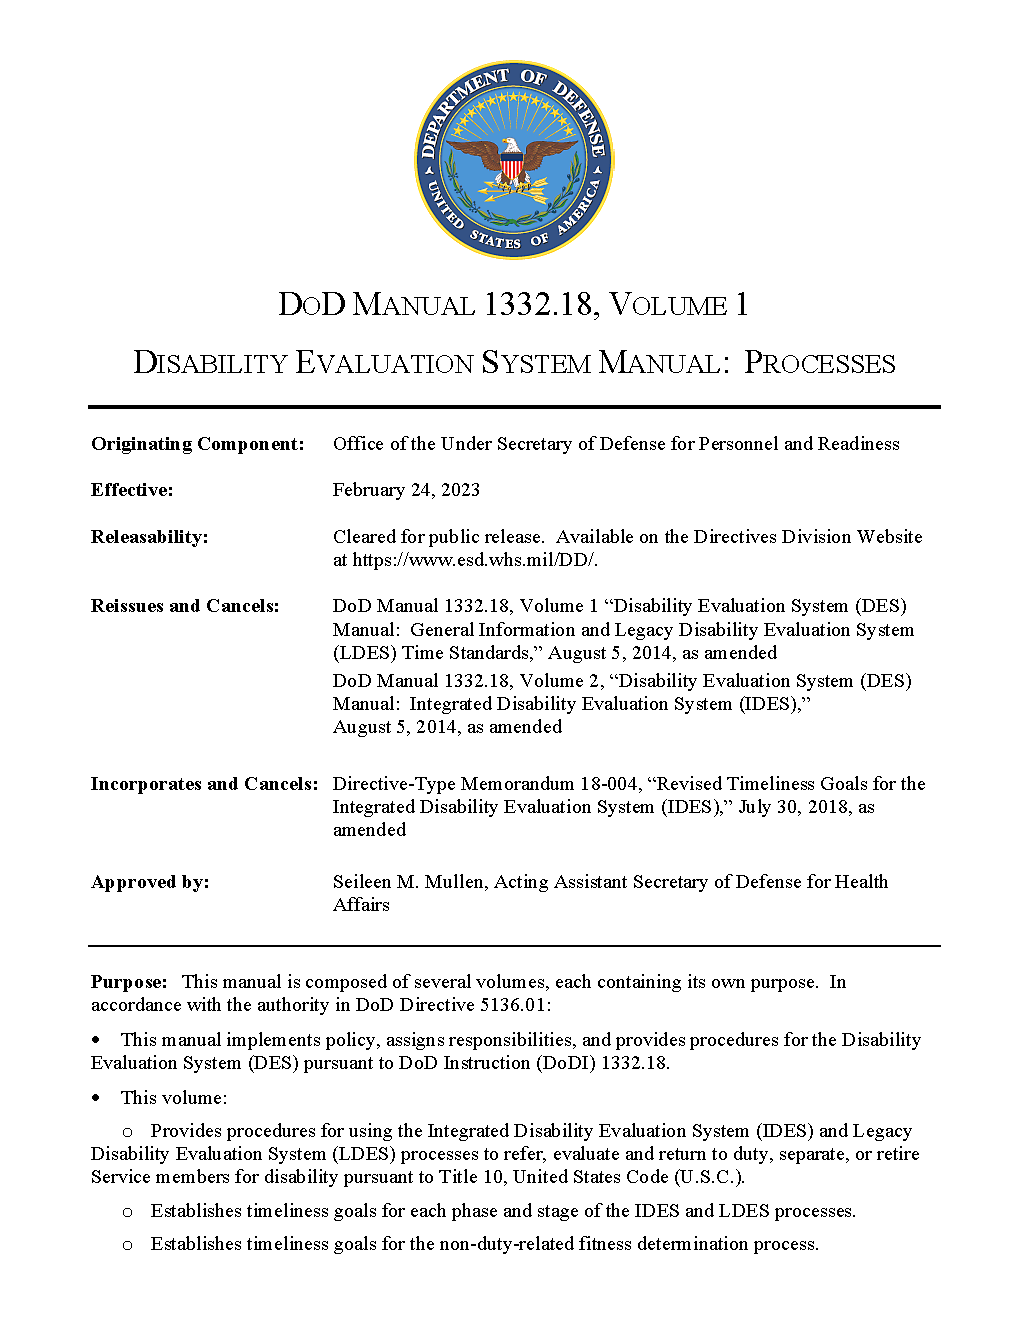 Downloadable PDF of Department of Defense Manual (DoDM) 1332.18, Volume 1, Disability Evaluation System Manual: Processes